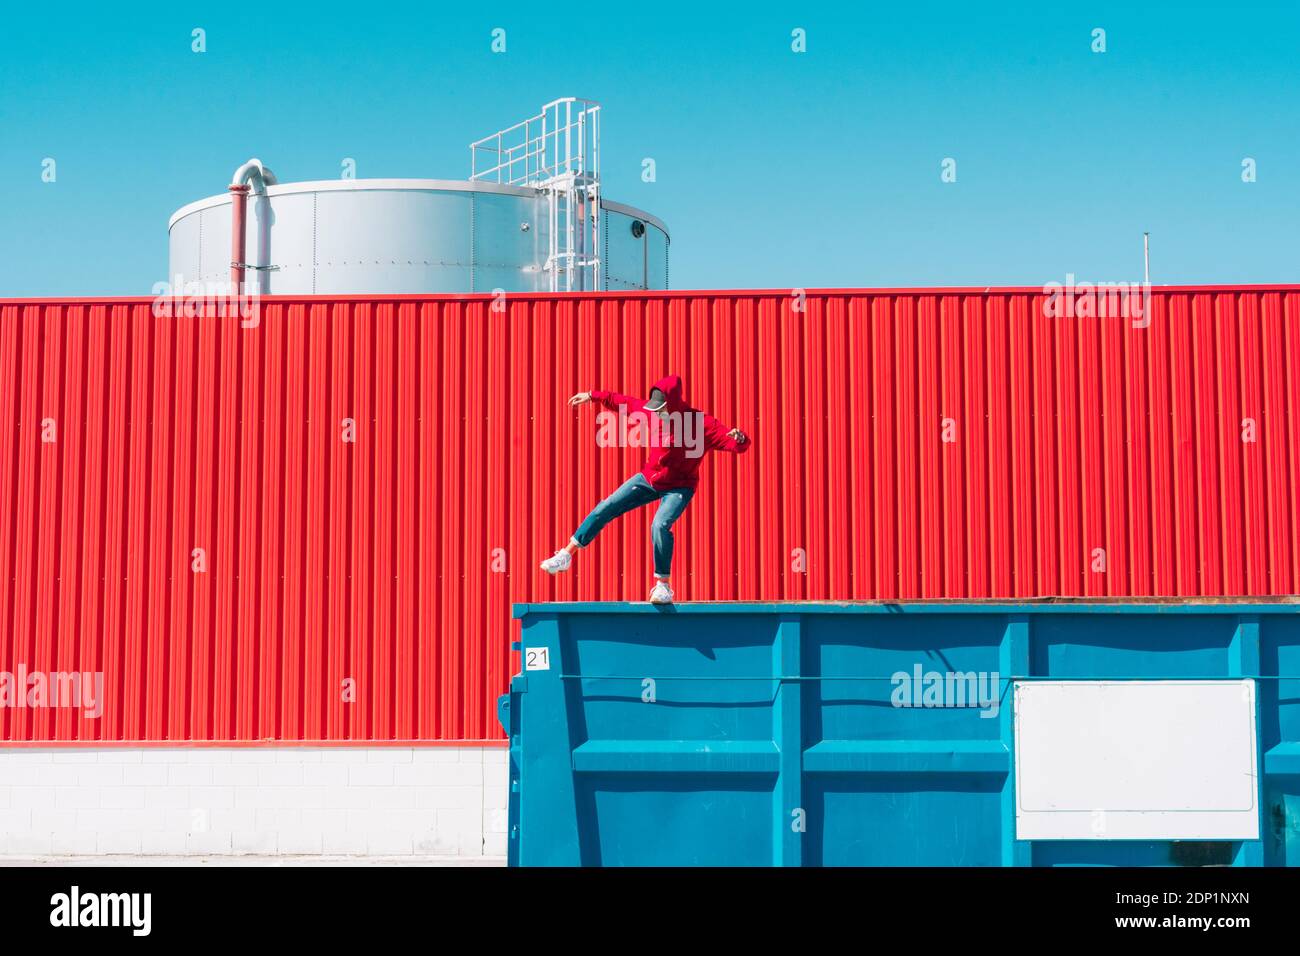 Young man wearing red hooded jacket balancing on edge of container in front of red wall in industrial setting Stock Photo